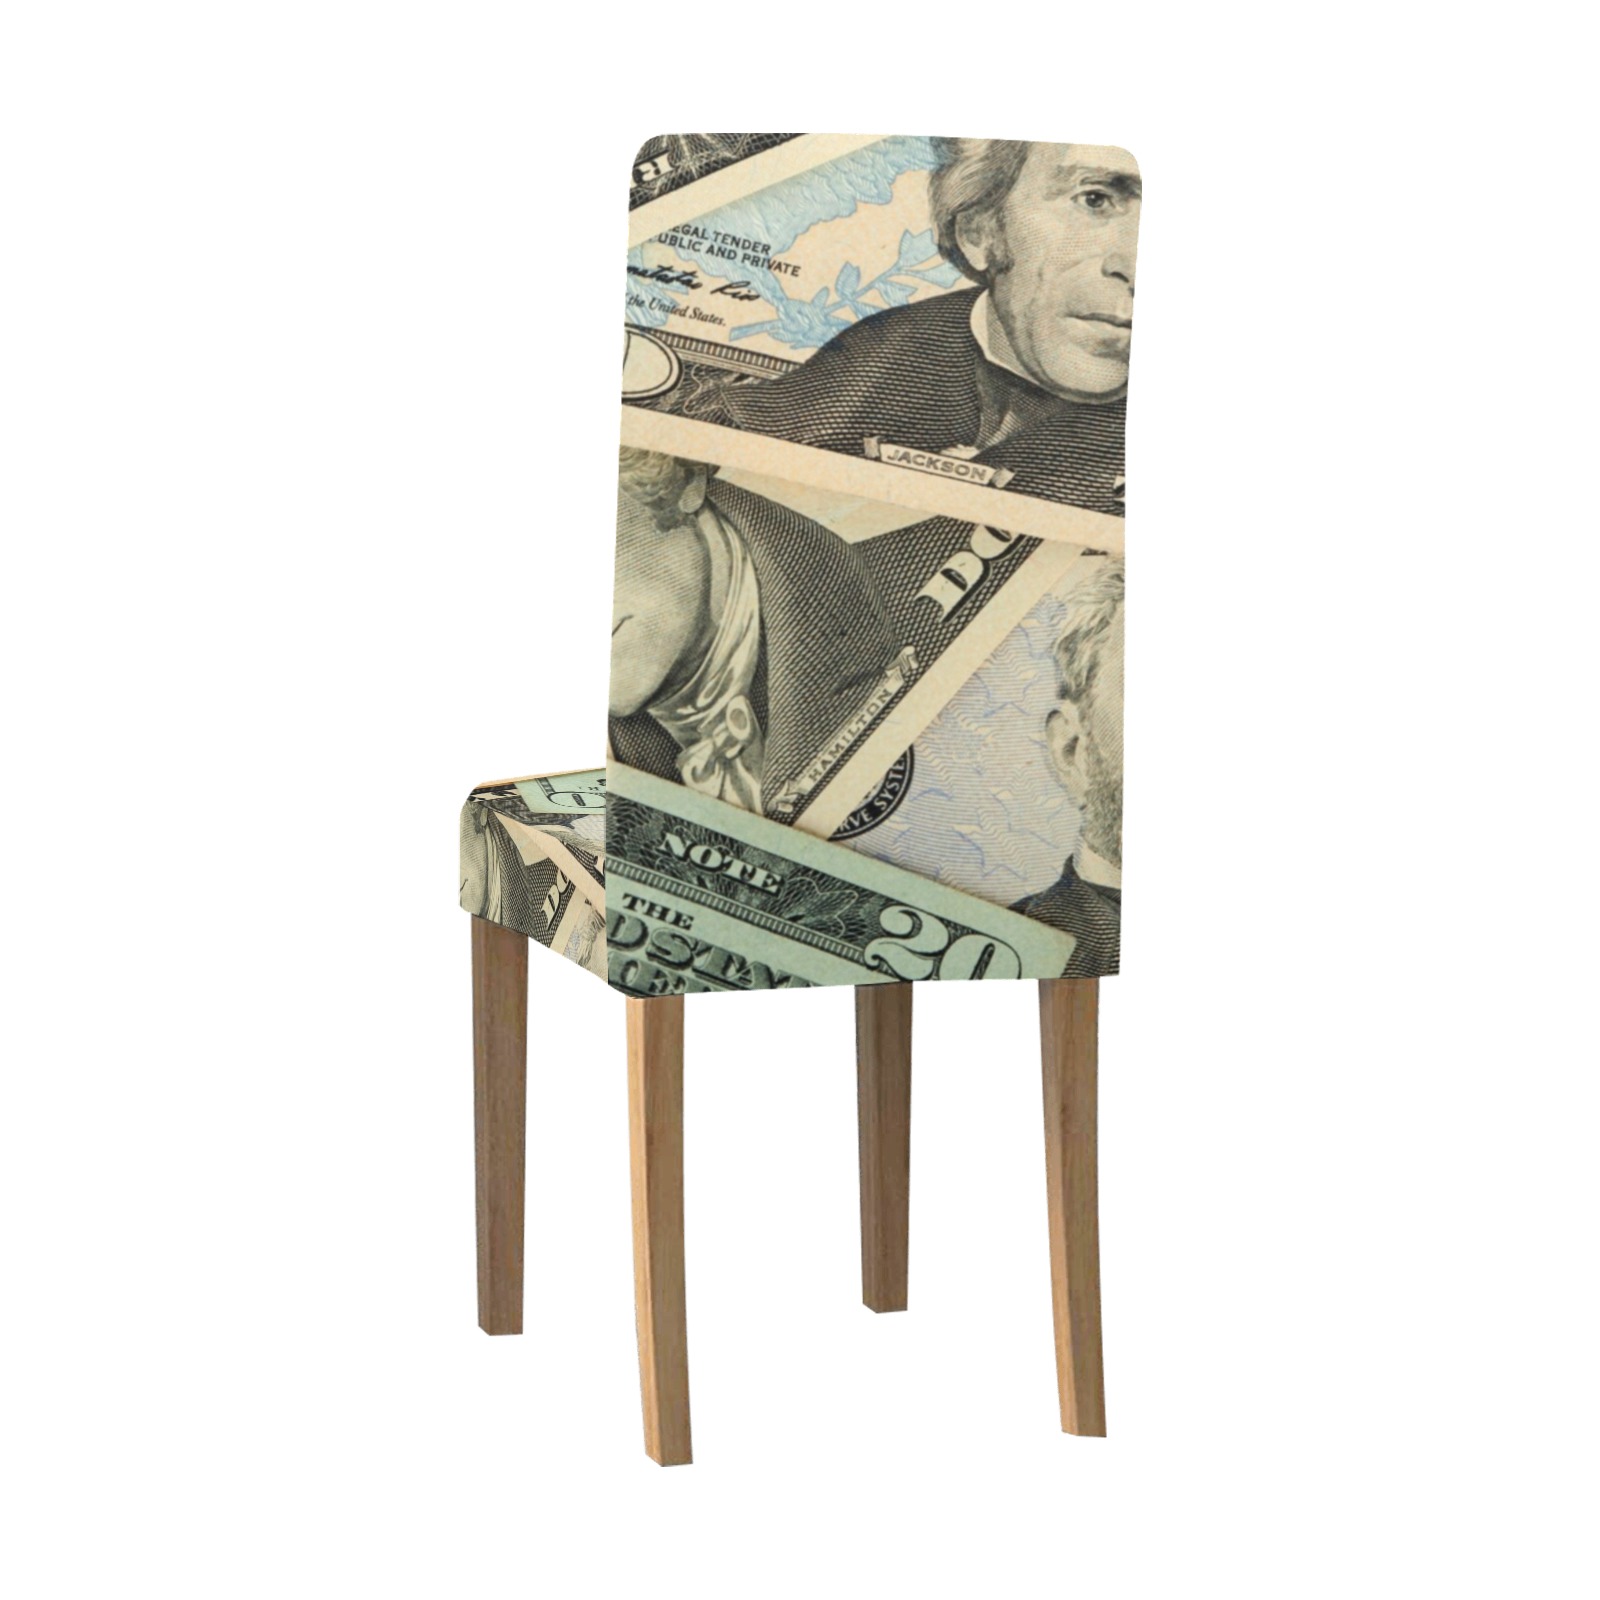 US PAPER CURRENCY Chair Cover (Pack of 6)